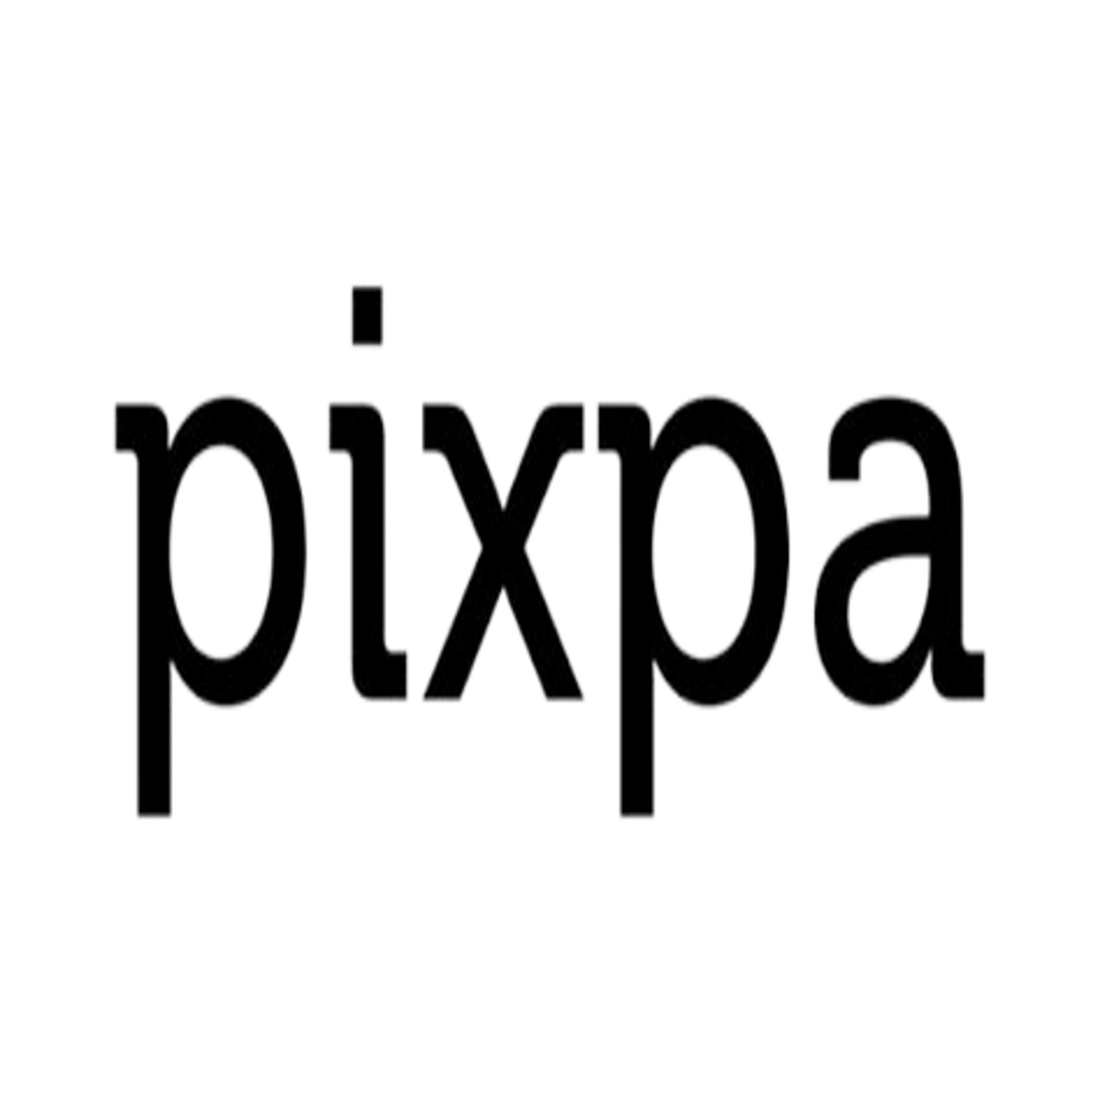 Pixpa - Best for Photographers and Artists